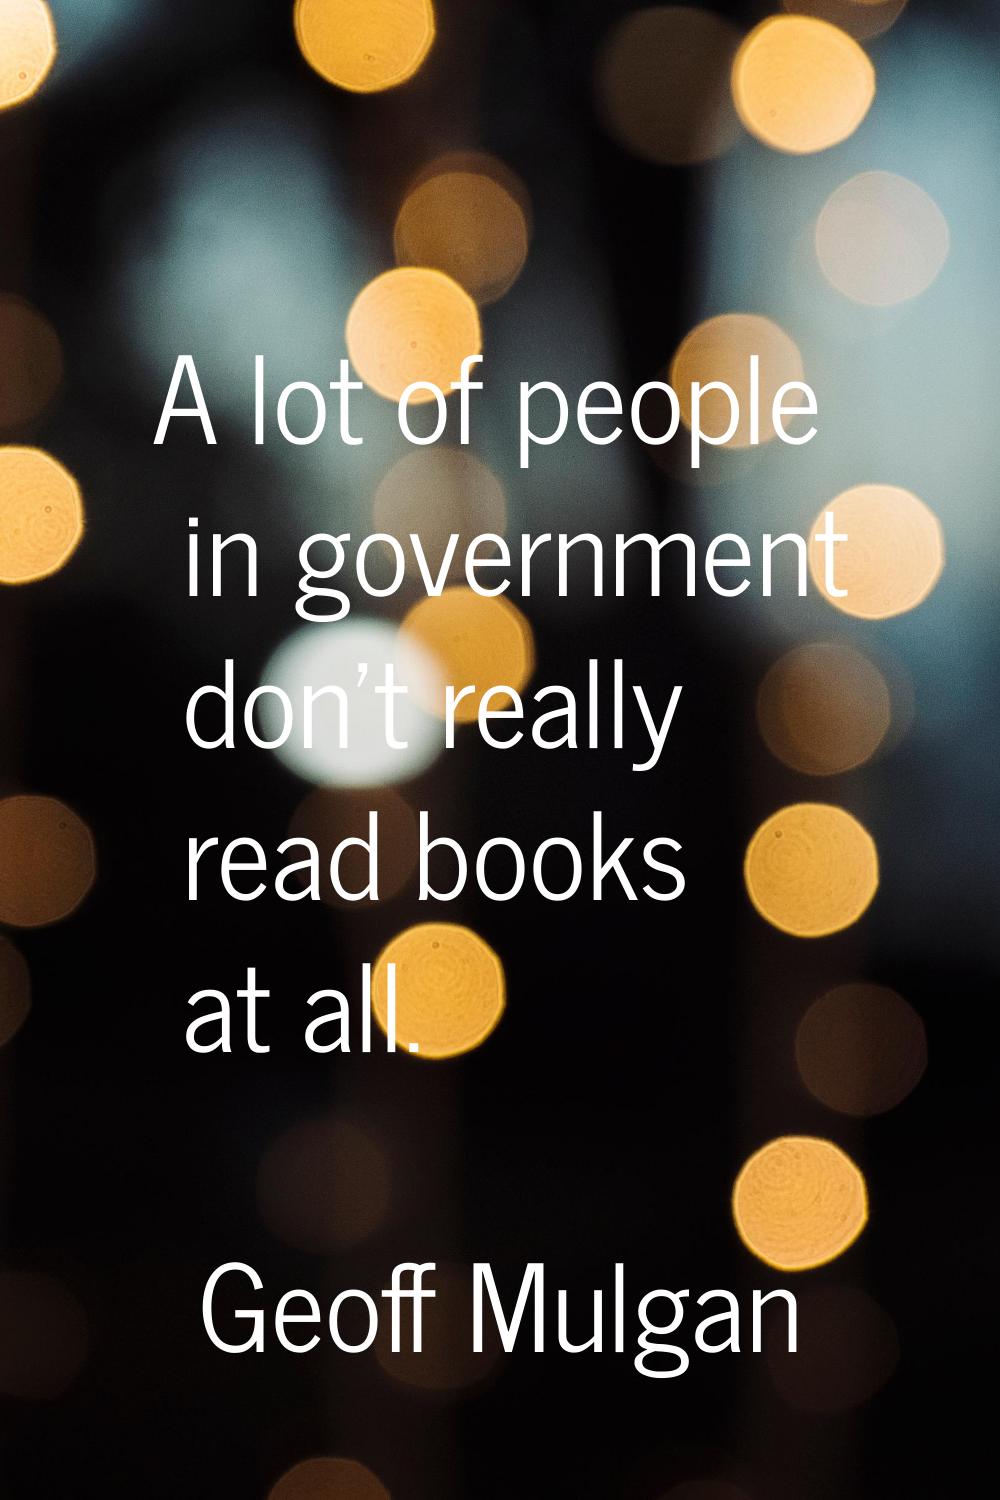 A lot of people in government don't really read books at all.